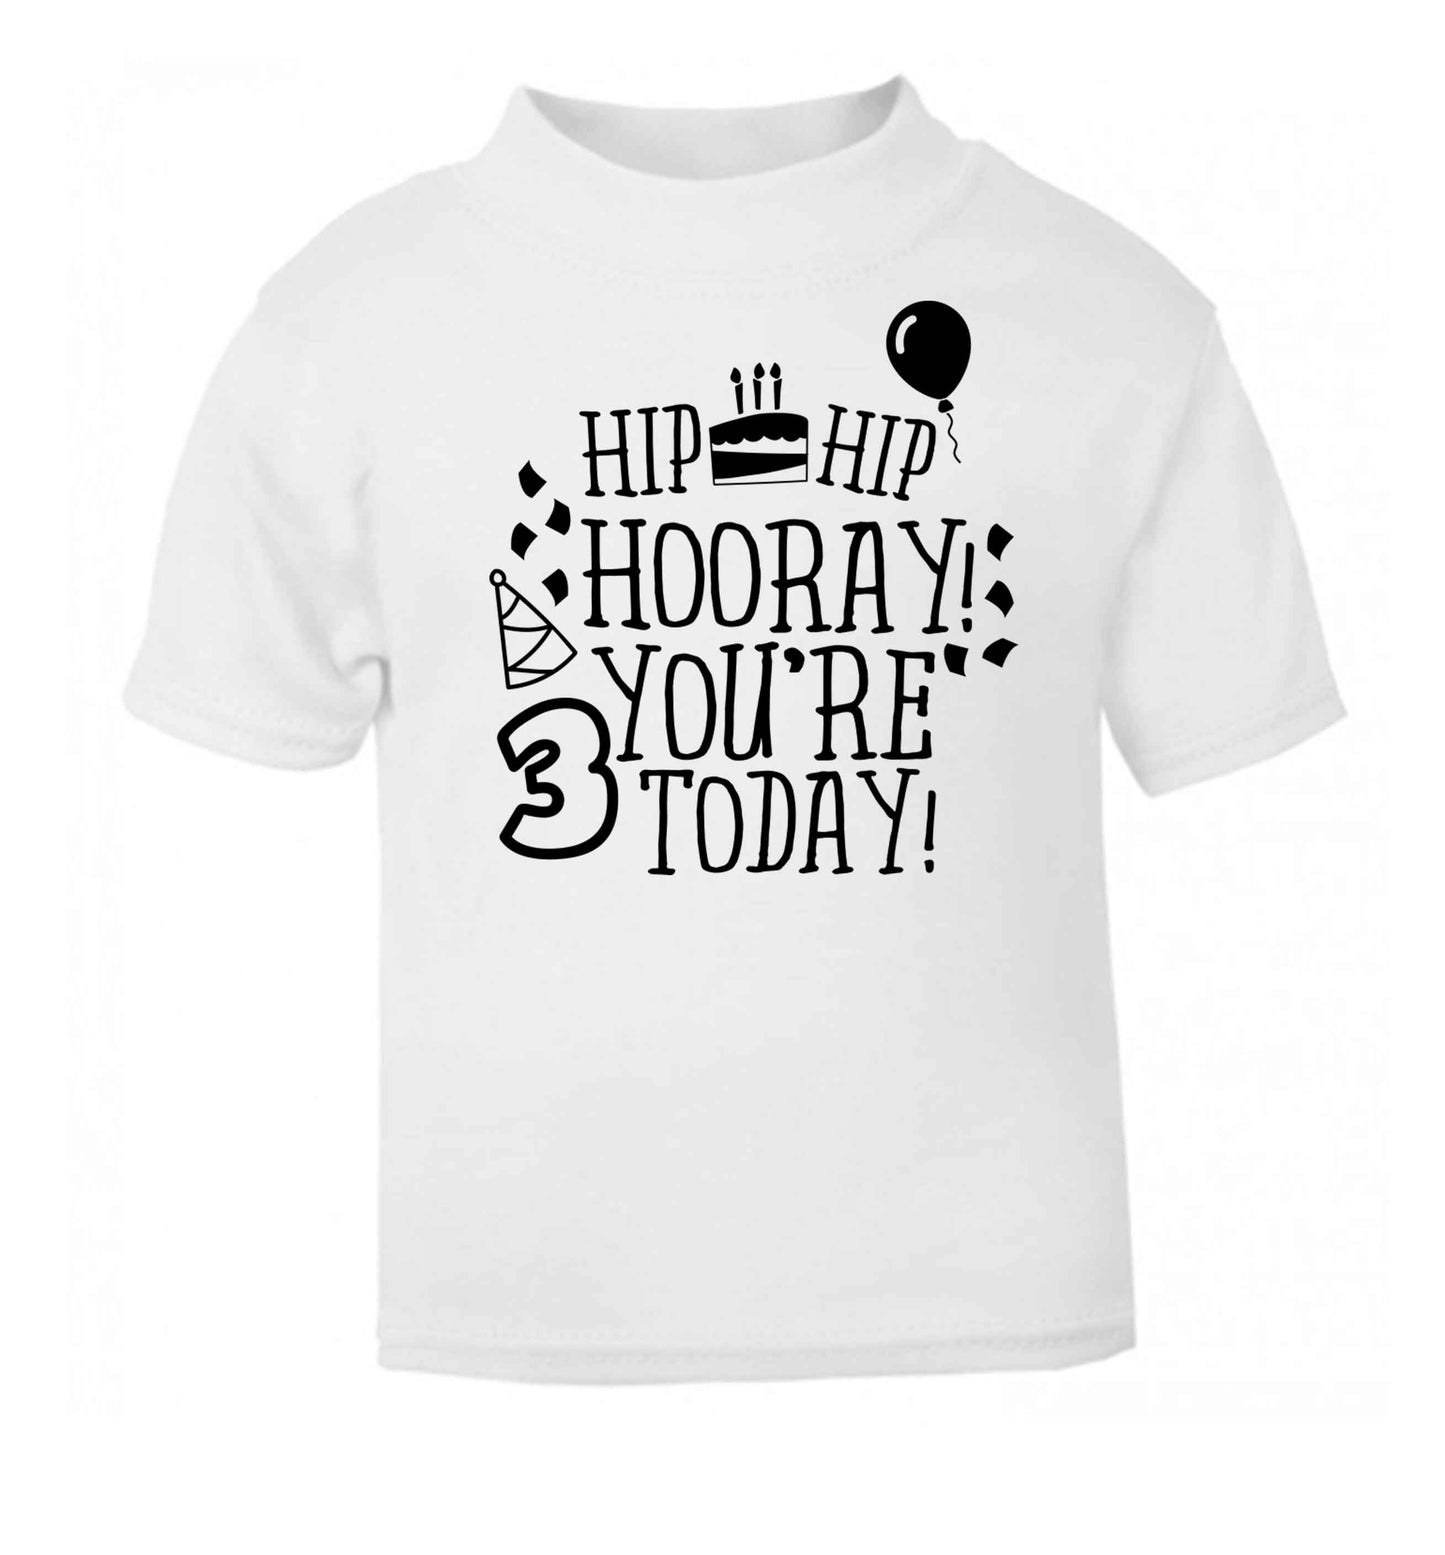 You're 3 Todaywhite baby toddler Tshirt 2 Years